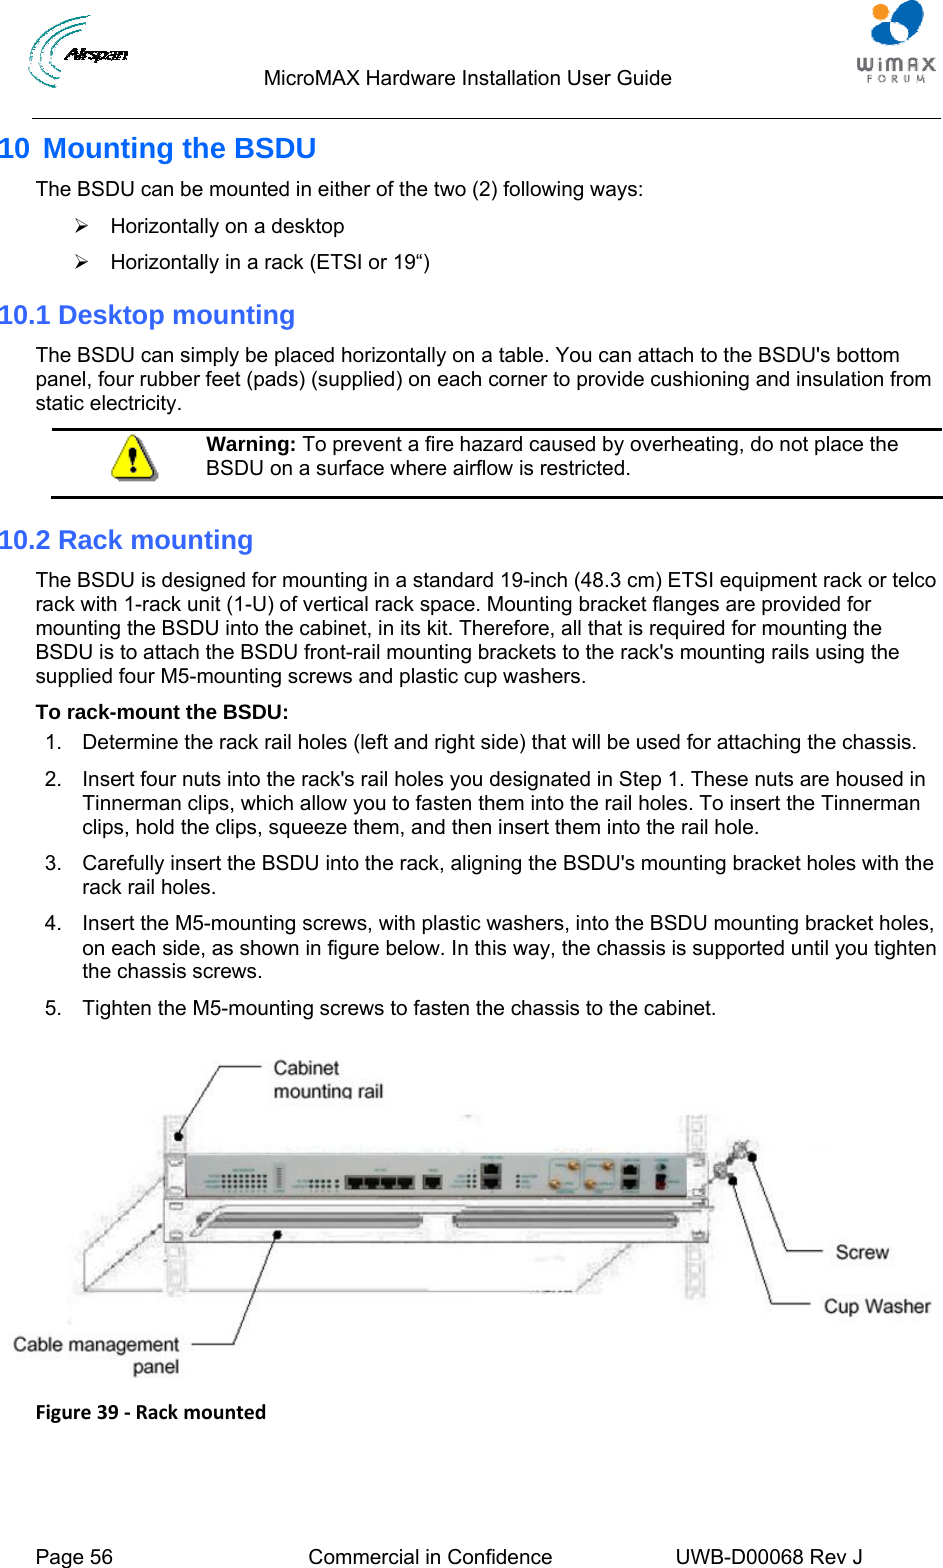                                  MicroMAX Hardware Installation User Guide  Page 56  Commercial in Confidence  UWB-D00068 Rev J   10 Mounting the BSDU The BSDU can be mounted in either of the two (2) following ways:  ¾  Horizontally on a desktop ¾  Horizontally in a rack (ETSI or 19“)  10.1 Desktop mounting The BSDU can simply be placed horizontally on a table. You can attach to the BSDU&apos;s bottom panel, four rubber feet (pads) (supplied) on each corner to provide cushioning and insulation from static electricity.  Warning: To prevent a fire hazard caused by overheating, do not place the BSDU on a surface where airflow is restricted. 10.2 Rack mounting The BSDU is designed for mounting in a standard 19-inch (48.3 cm) ETSI equipment rack or telco rack with 1-rack unit (1-U) of vertical rack space. Mounting bracket flanges are provided for mounting the BSDU into the cabinet, in its kit. Therefore, all that is required for mounting the BSDU is to attach the BSDU front-rail mounting brackets to the rack&apos;s mounting rails using the supplied four M5-mounting screws and plastic cup washers. To rack-mount the BSDU: 1.  Determine the rack rail holes (left and right side) that will be used for attaching the chassis. 2.  Insert four nuts into the rack&apos;s rail holes you designated in Step 1. These nuts are housed in Tinnerman clips, which allow you to fasten them into the rail holes. To insert the Tinnerman clips, hold the clips, squeeze them, and then insert them into the rail hole. 3.  Carefully insert the BSDU into the rack, aligning the BSDU&apos;s mounting bracket holes with the rack rail holes. 4.  Insert the M5-mounting screws, with plastic washers, into the BSDU mounting bracket holes, on each side, as shown in figure below. In this way, the chassis is supported until you tighten the chassis screws. 5.  Tighten the M5-mounting screws to fasten the chassis to the cabinet.   Figure39‐Rackmounted 